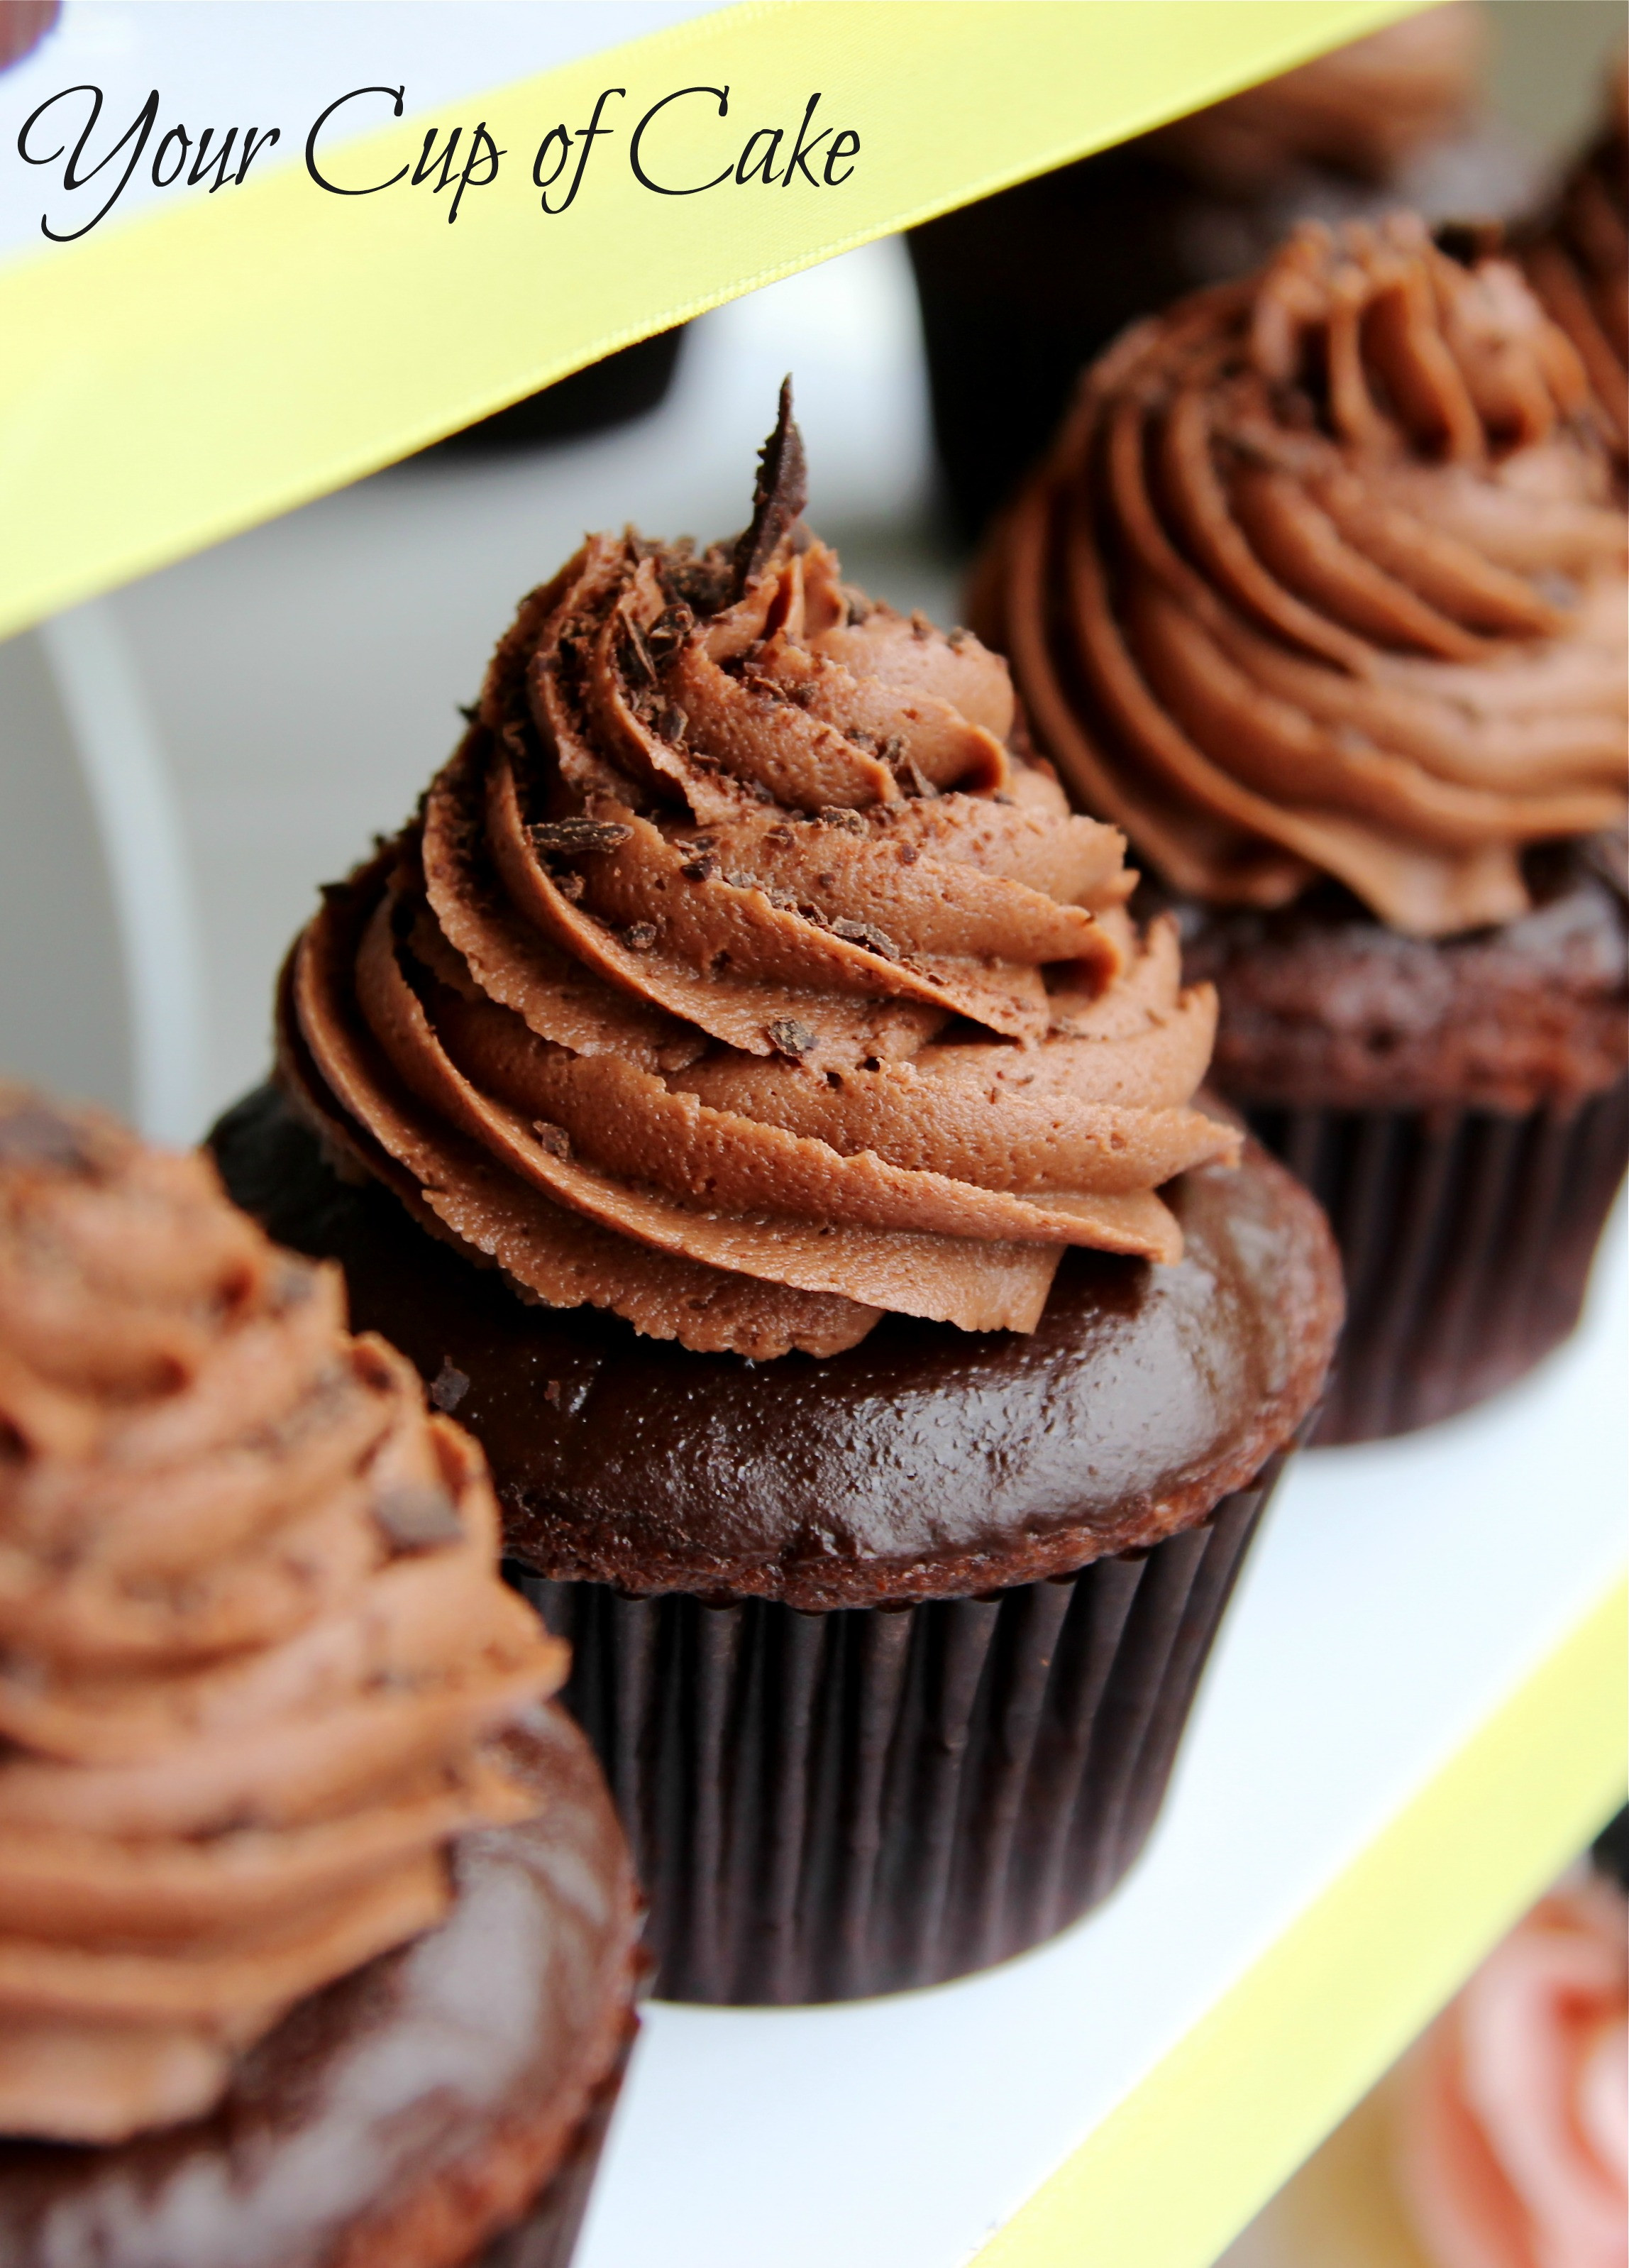 Best Cupcakes Recipe
 My Favorite Chocolate Cupcake Your Cup of Cake